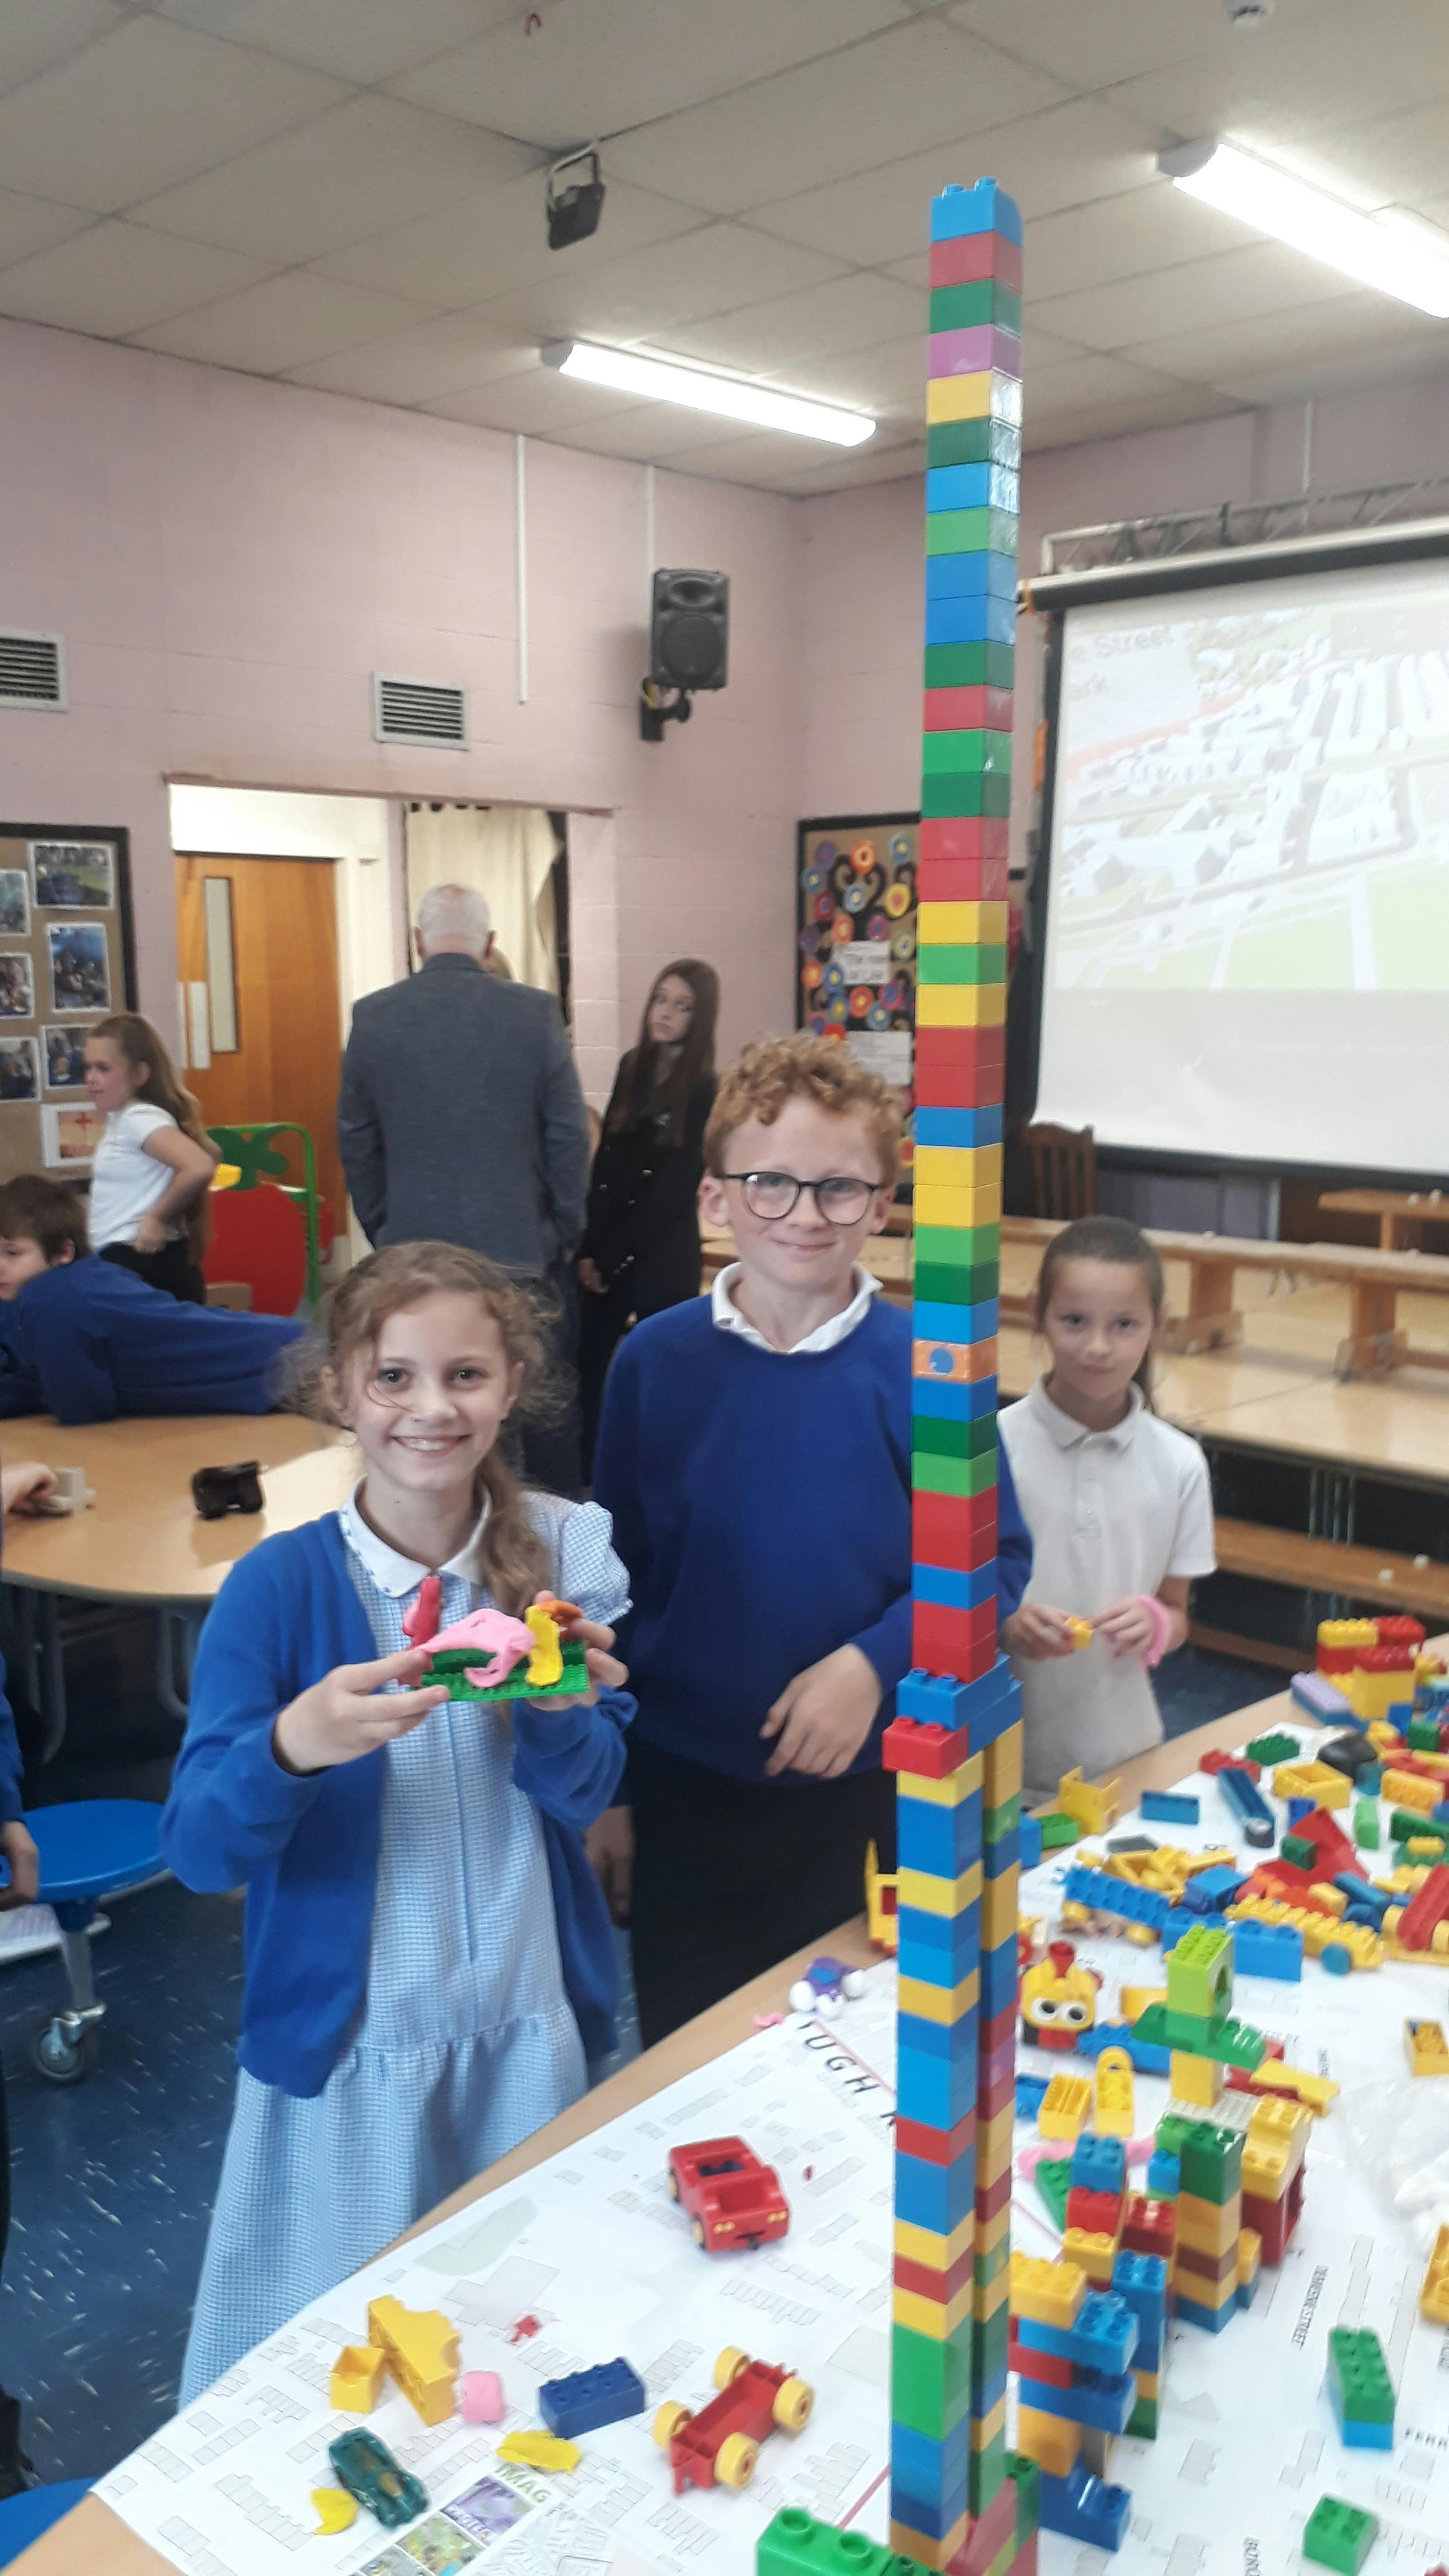 Students building with blocks